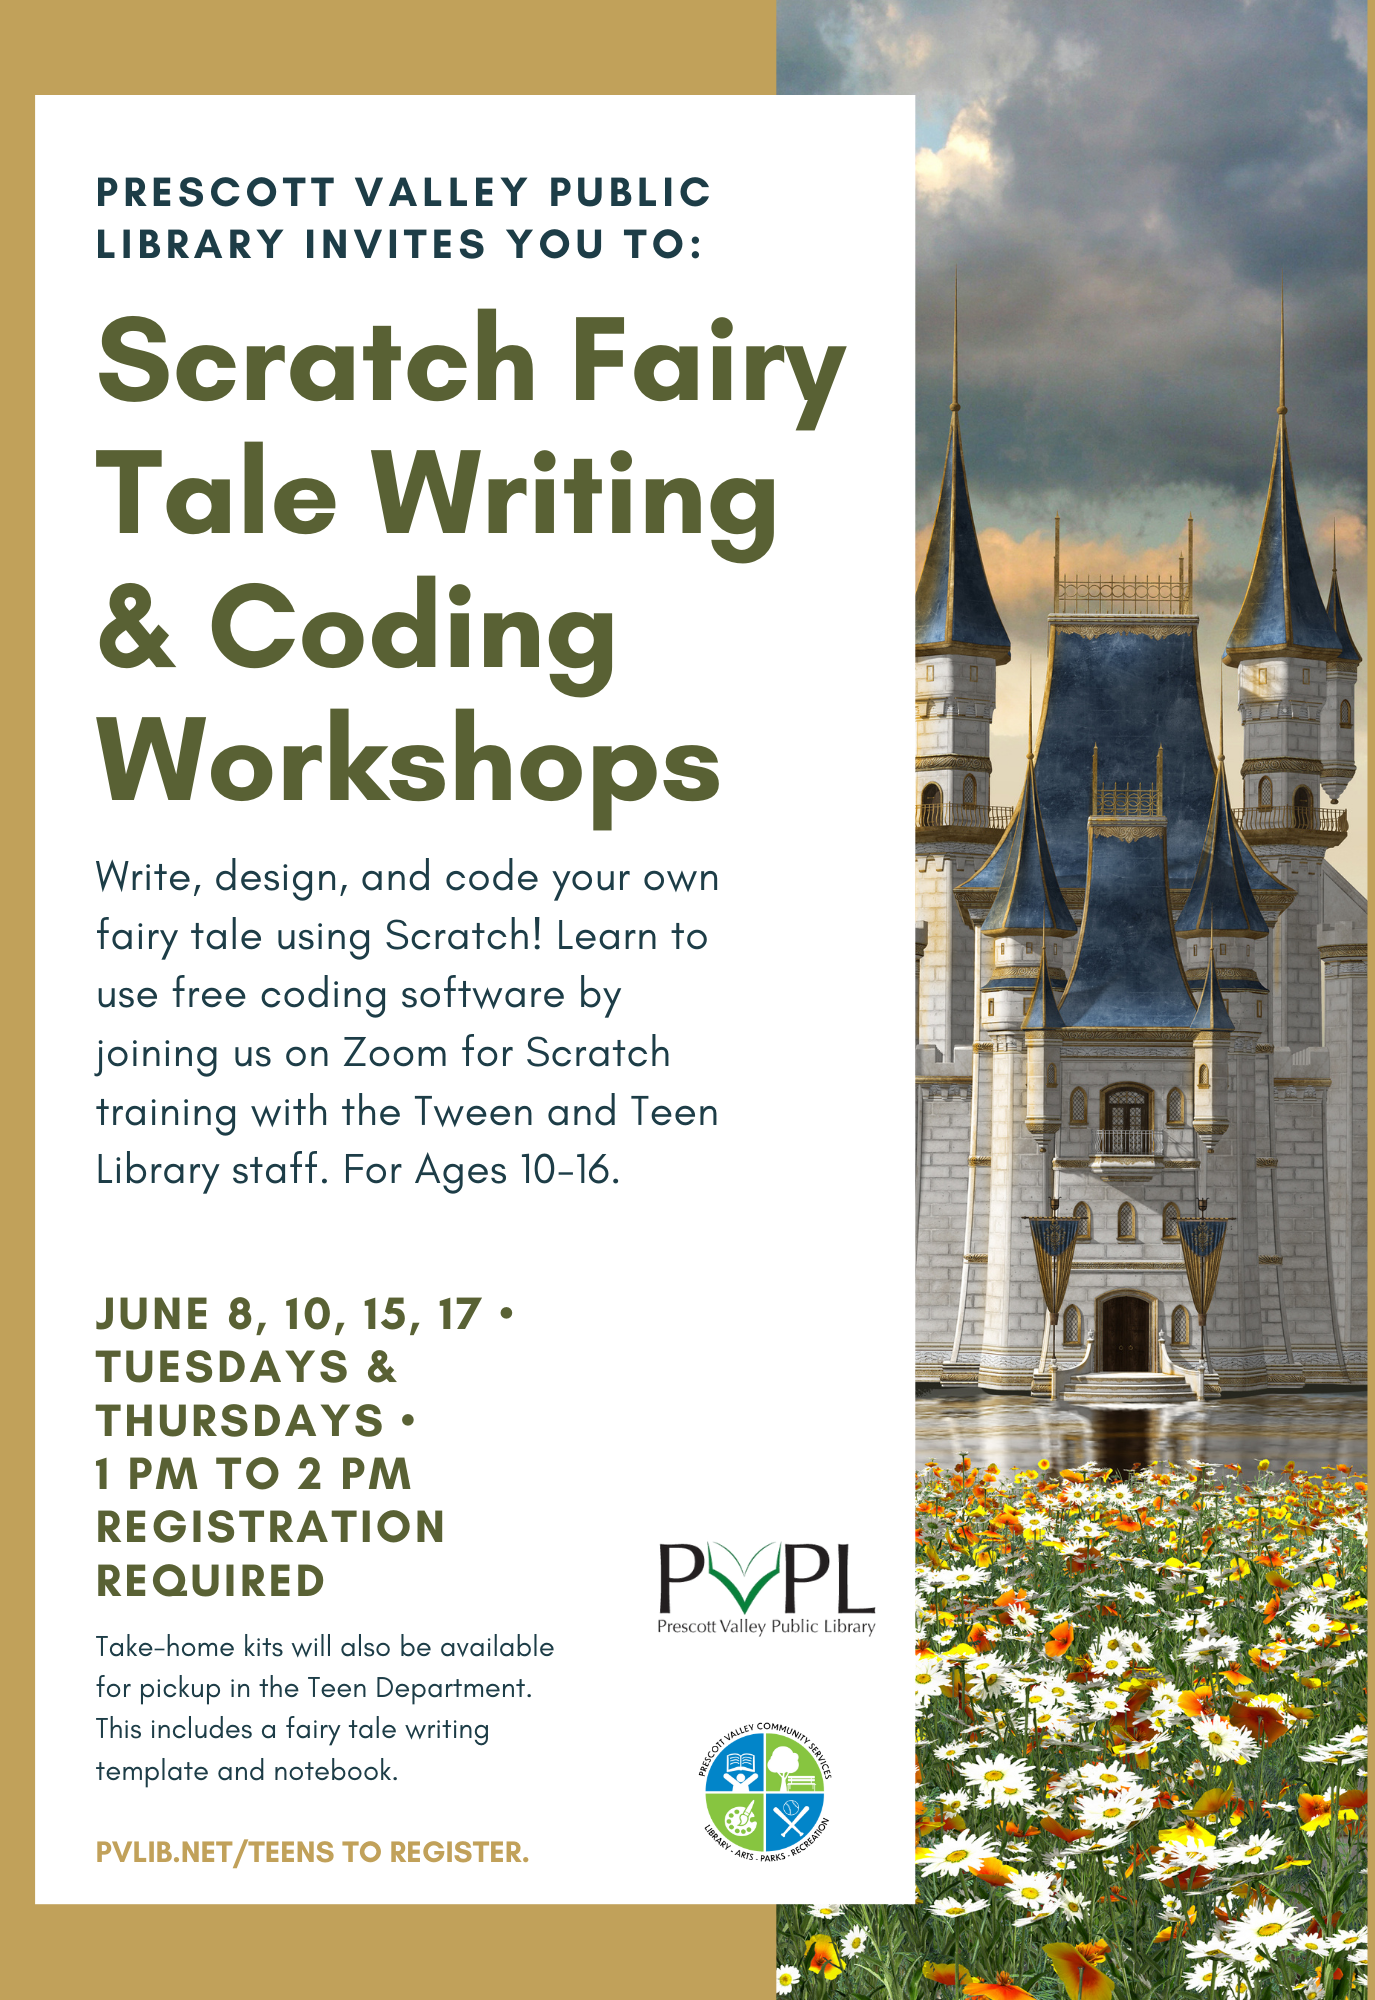 Fairy Tale Scratch Workshop on June 8, 10, 15 and 17